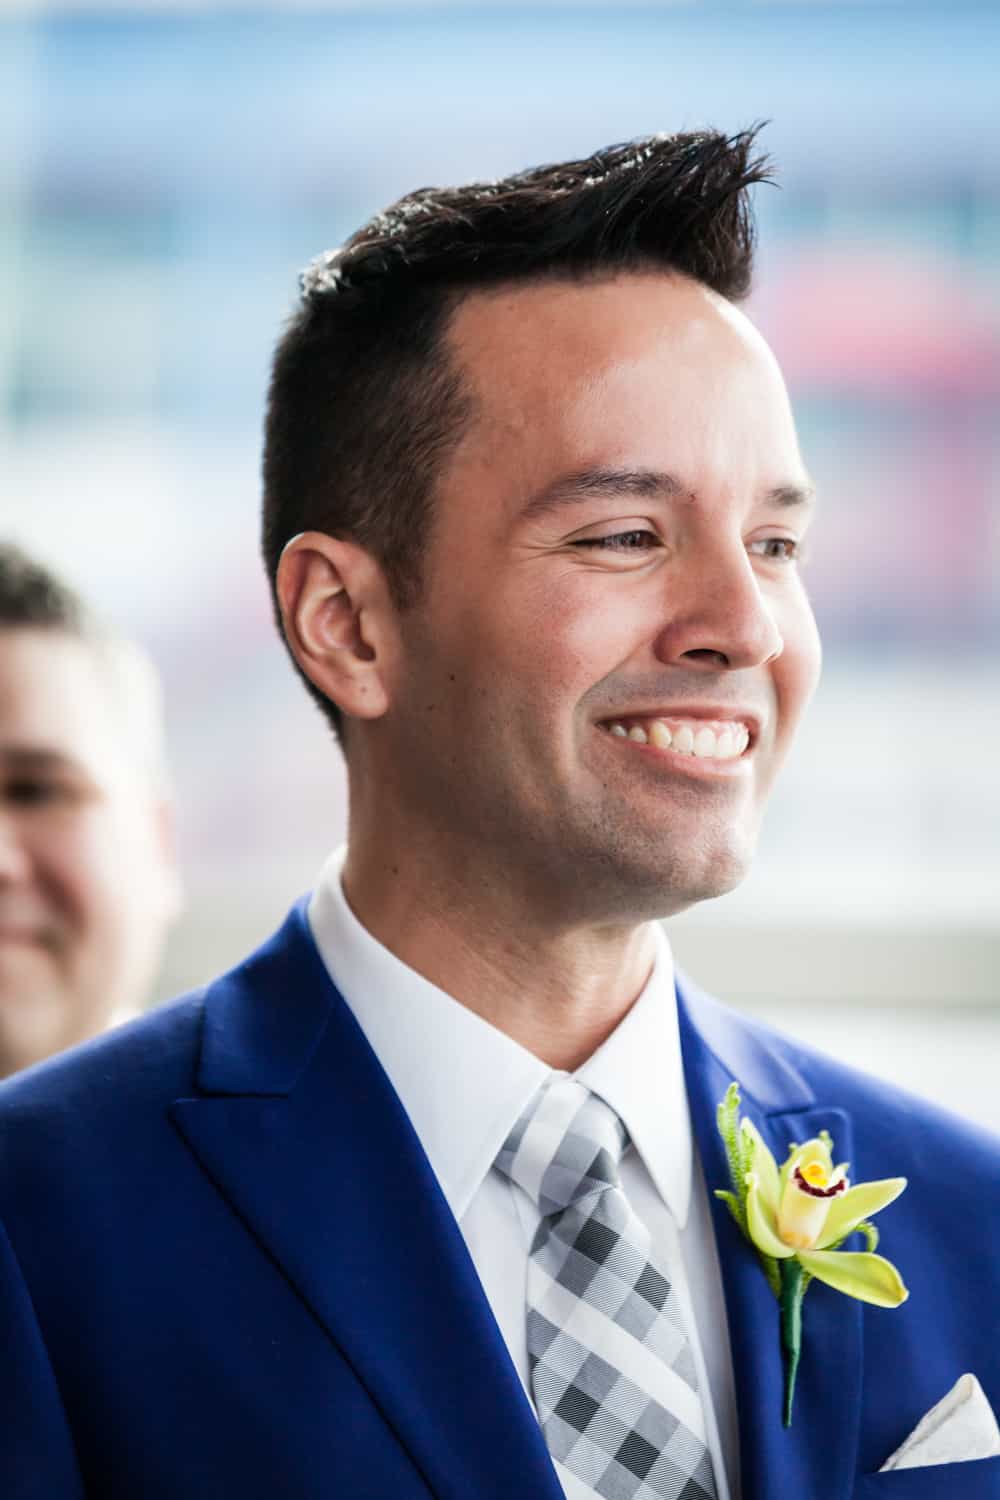 Groom smiling during ceremony at a Lighthouse at Chelsea Piers wedding